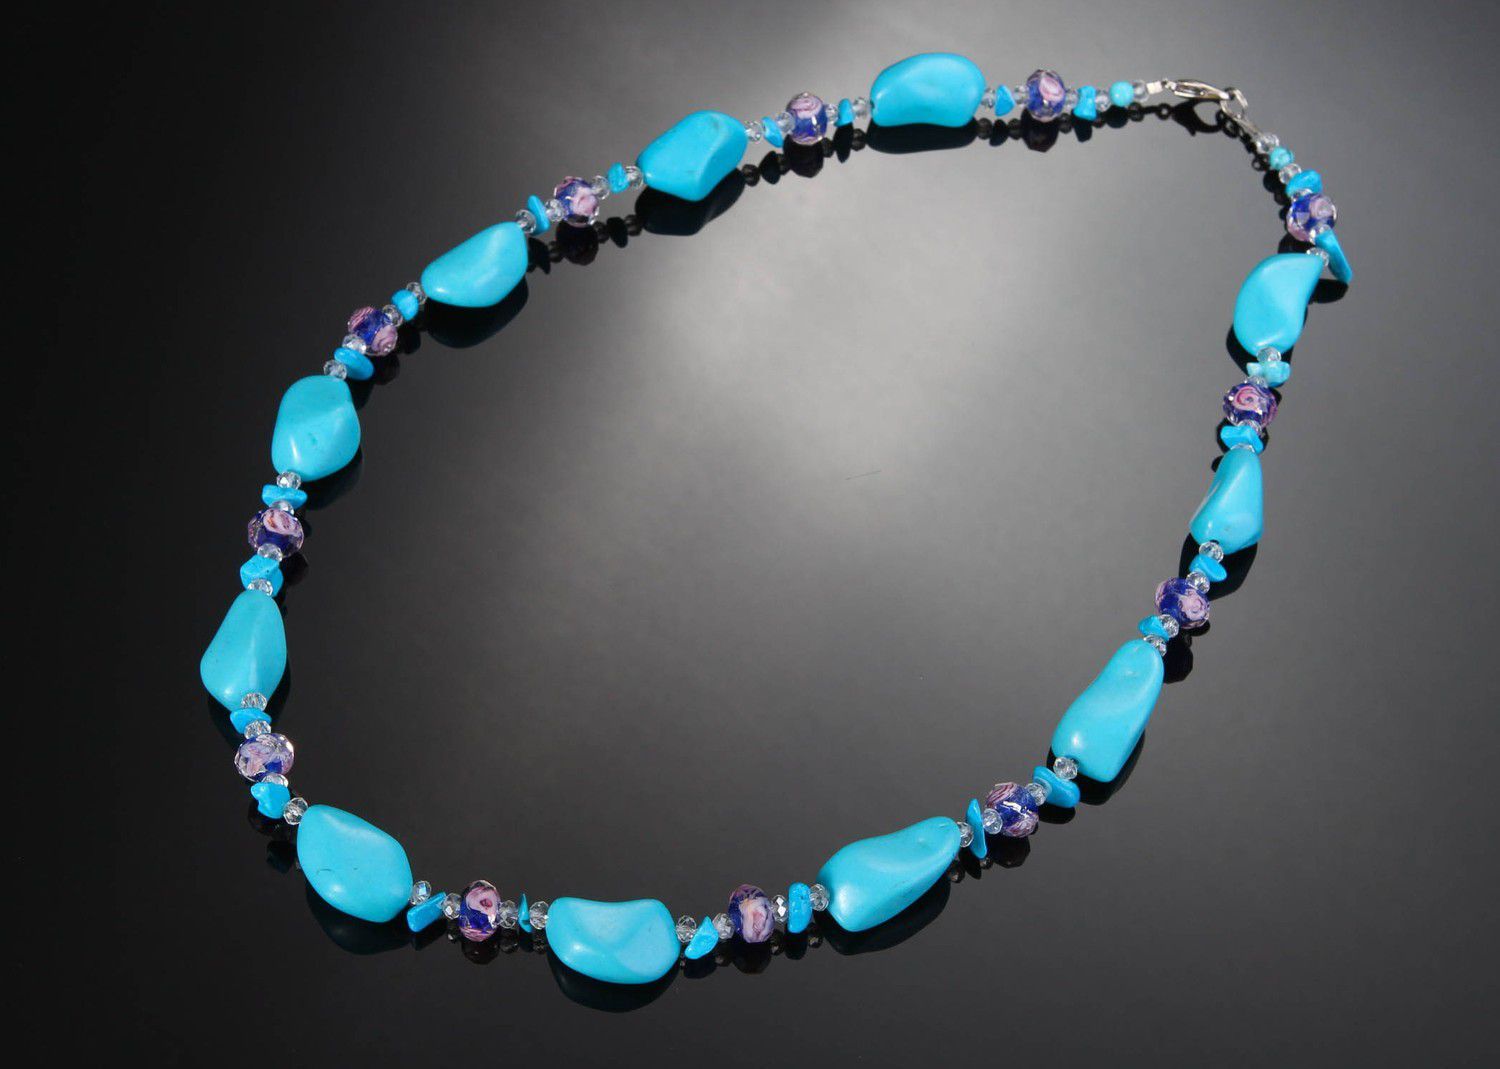 Necklace made of turquoise & glass photo 2